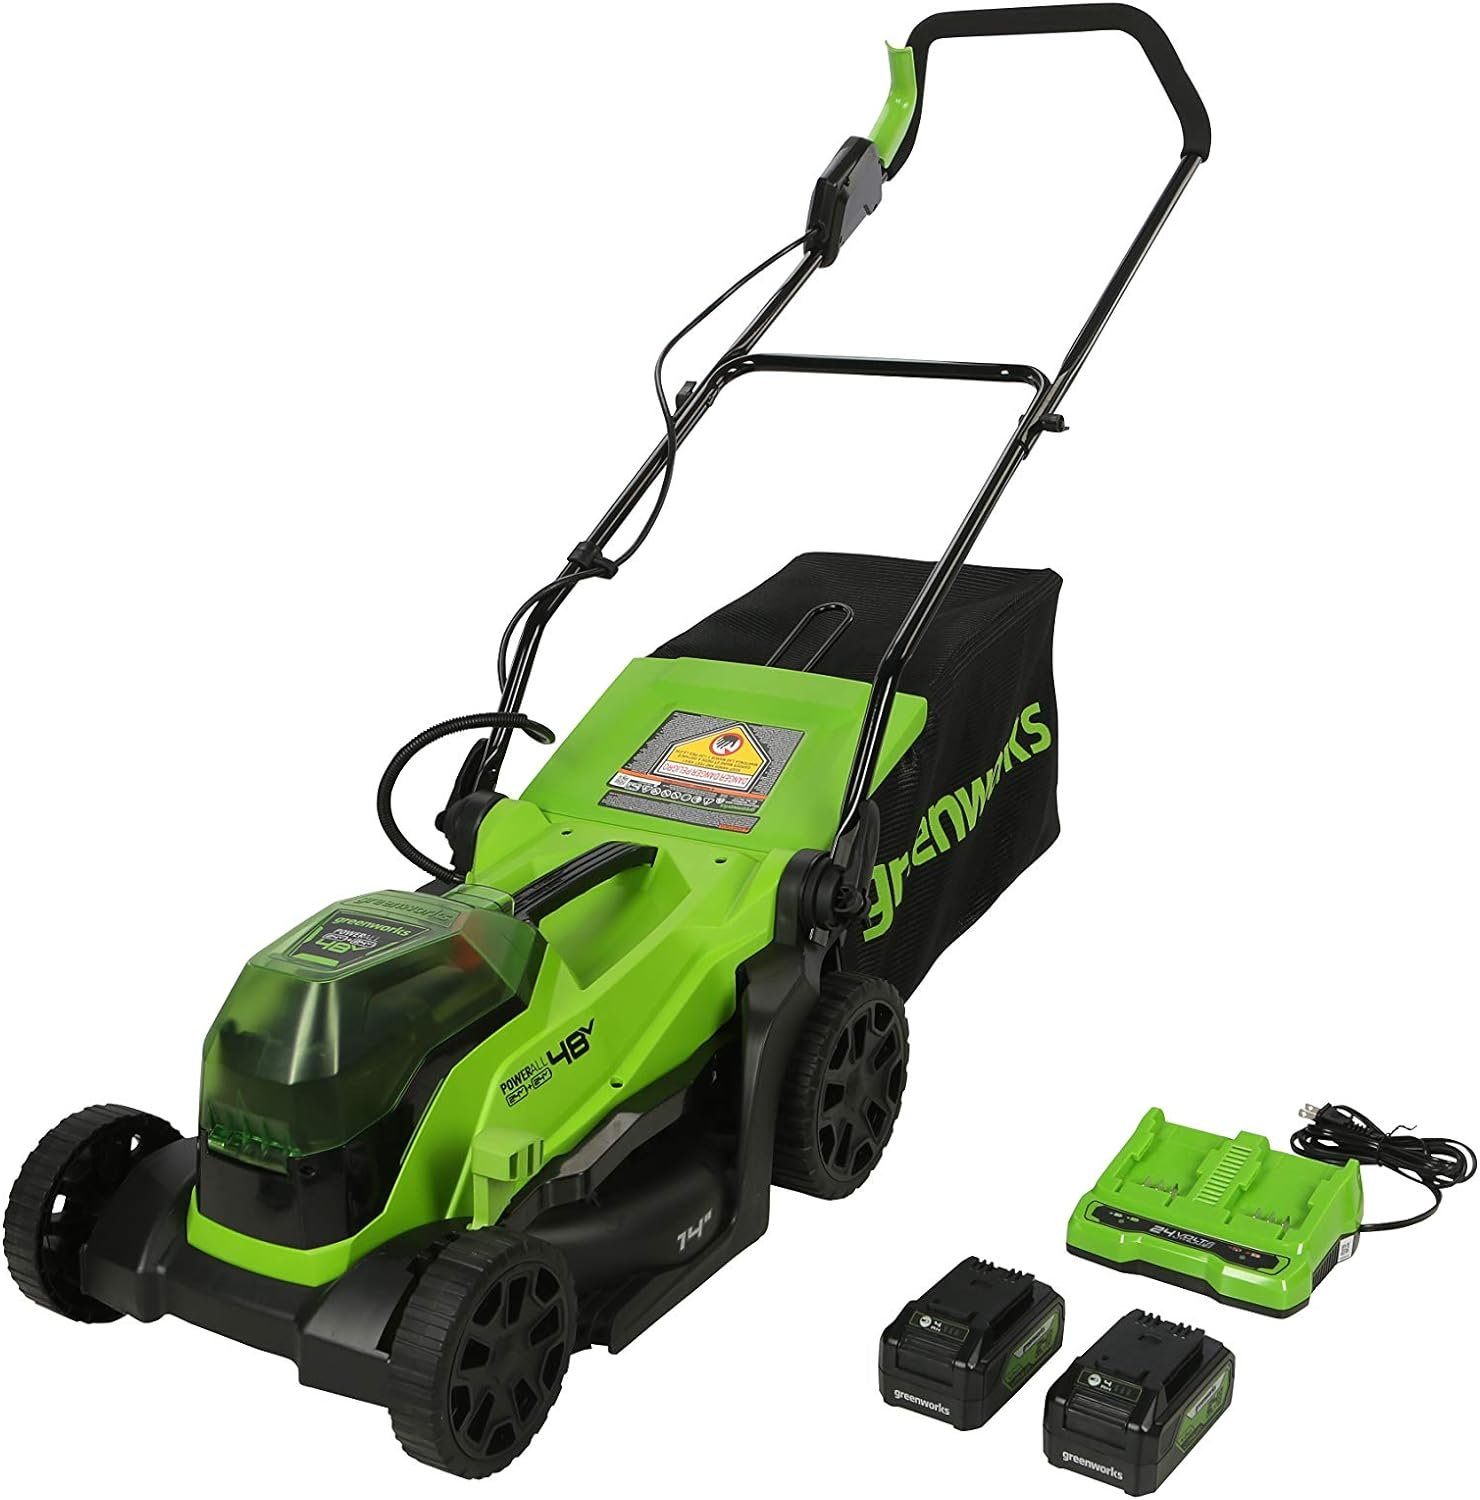 Greenworks 24V Lawn Mower Review